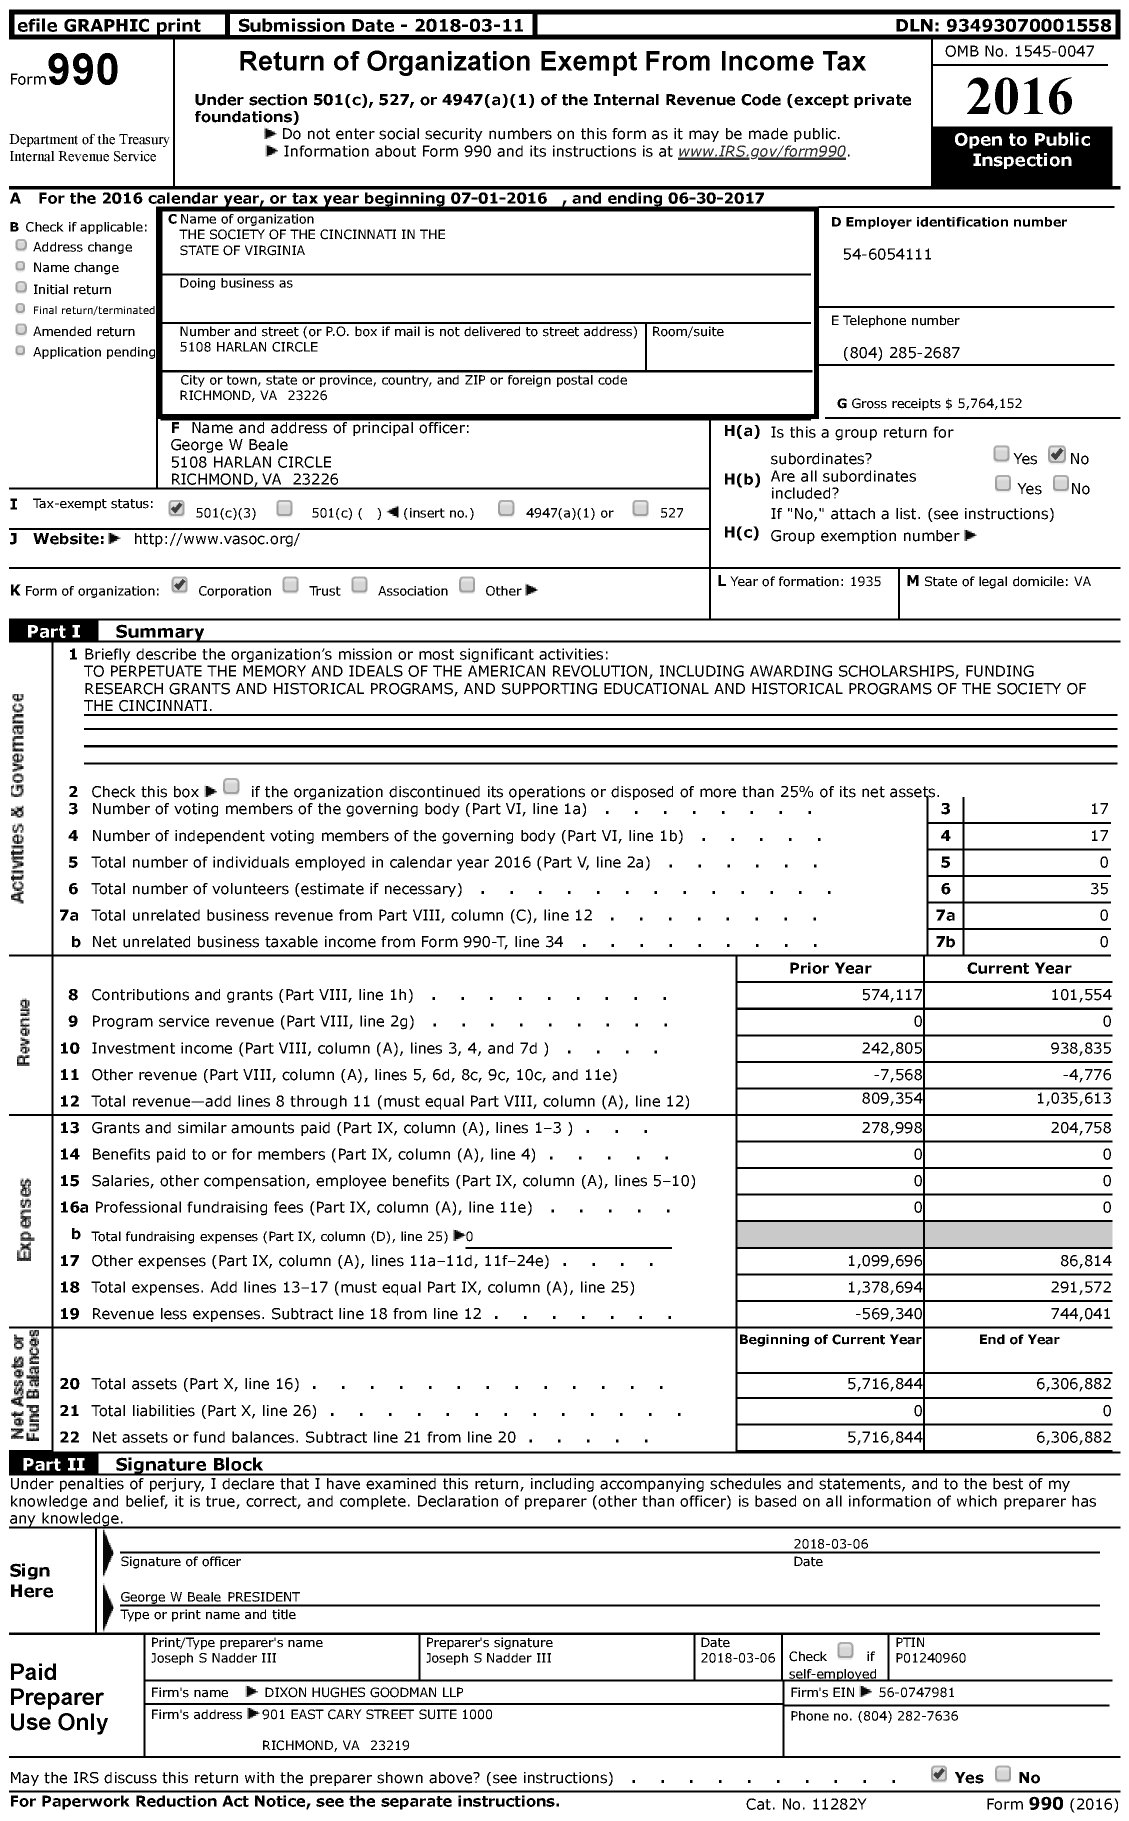 Image of first page of 2016 Form 990 for The Society of the Cincinnati in the State of Virginia